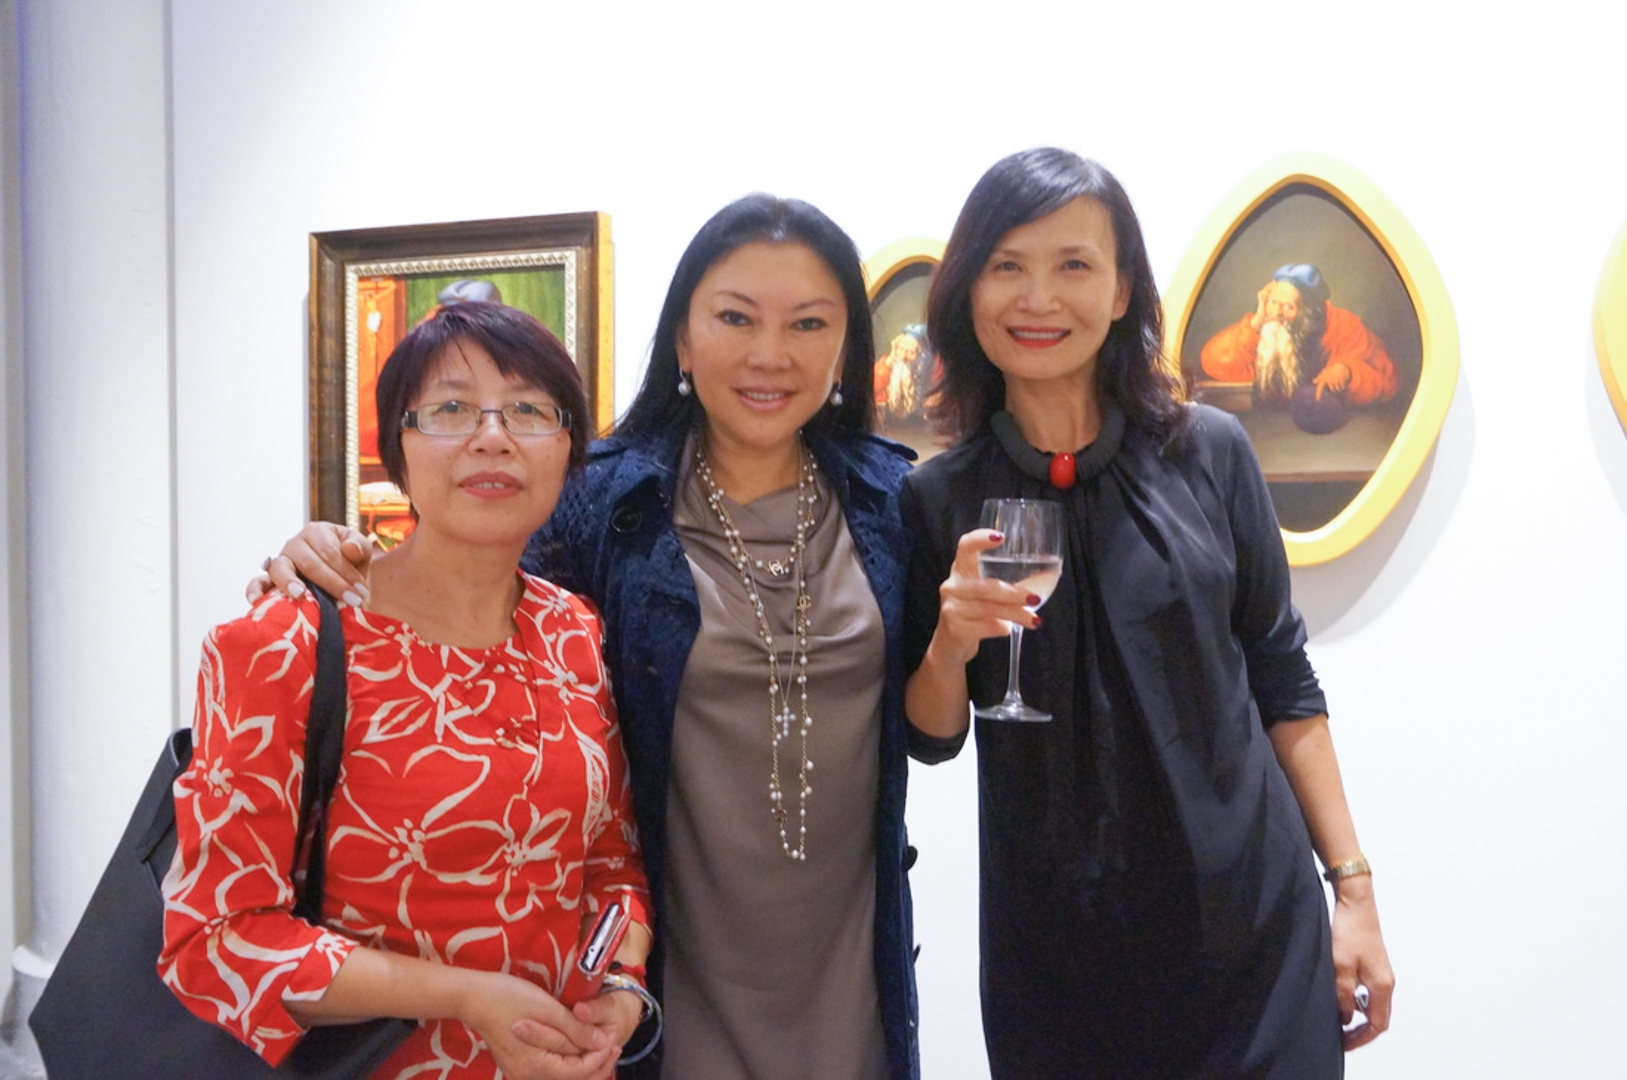 Something from Nothing, leading contemporary Chinese artist Cang Xin's first solo exhibition in Australia was opened by Dr Anna Davis, curator of MCA